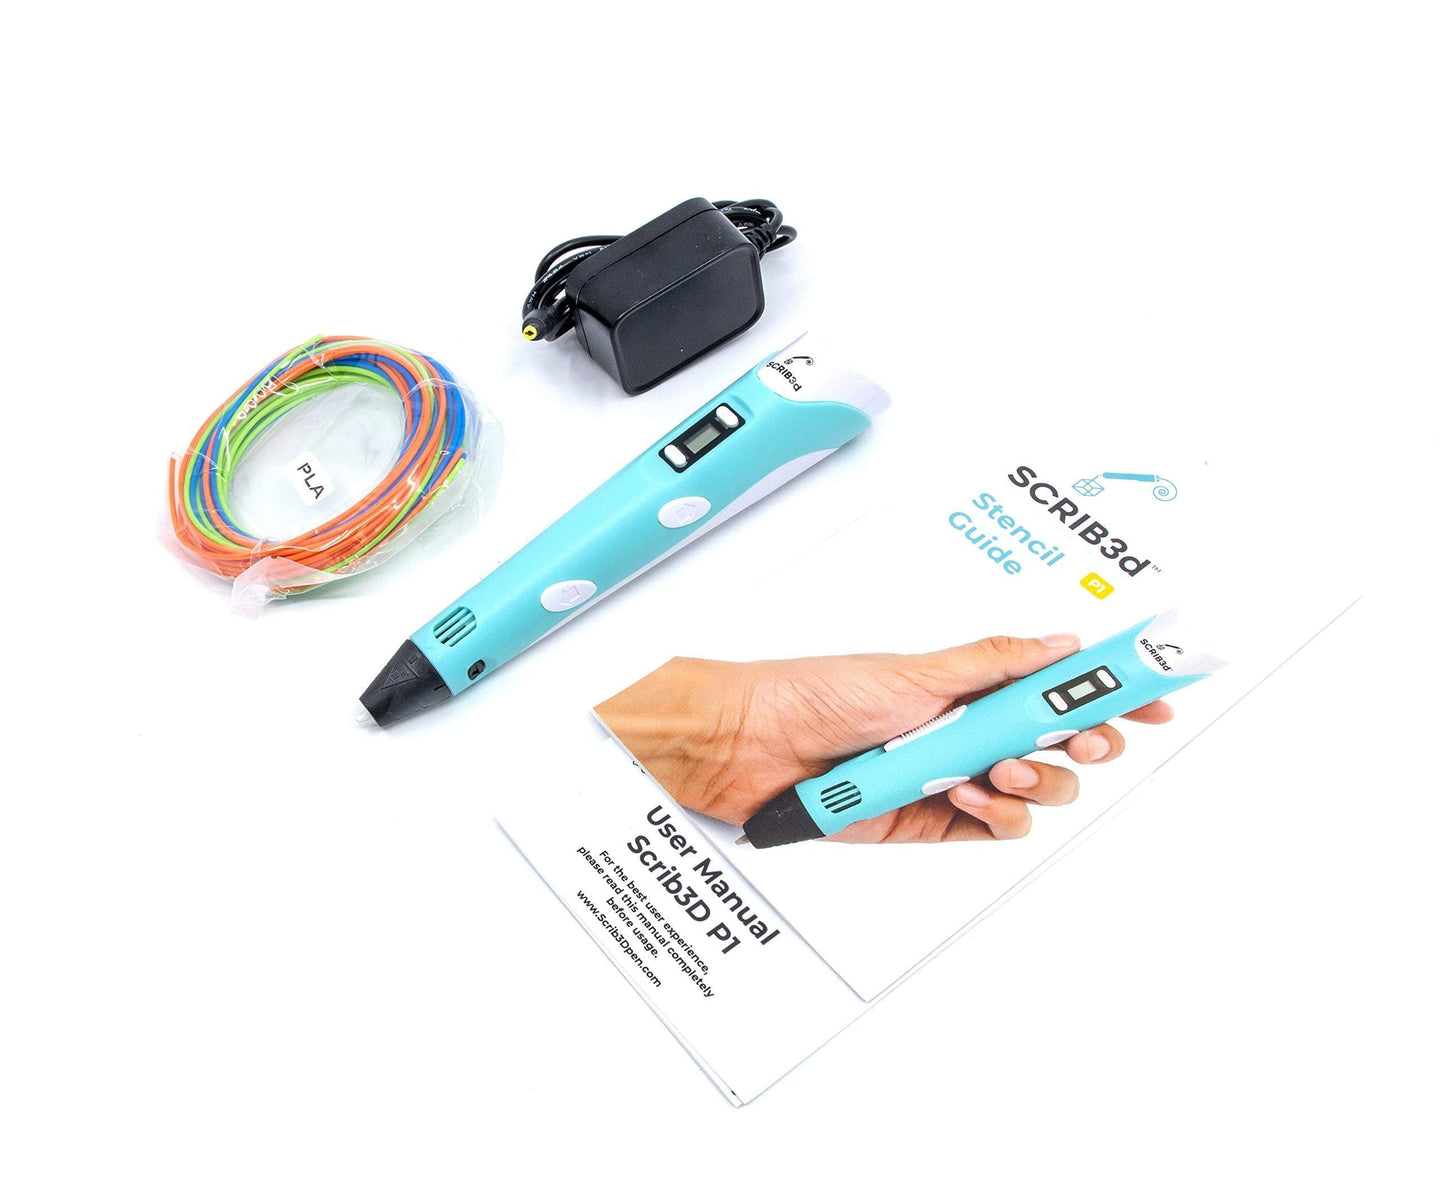 SCRIB3D P1 3D Printing Pen with Display - Includes 3D Pen, 3 Starter Colors of PLA Filament, Stencil Book + Project Guide, and Charger